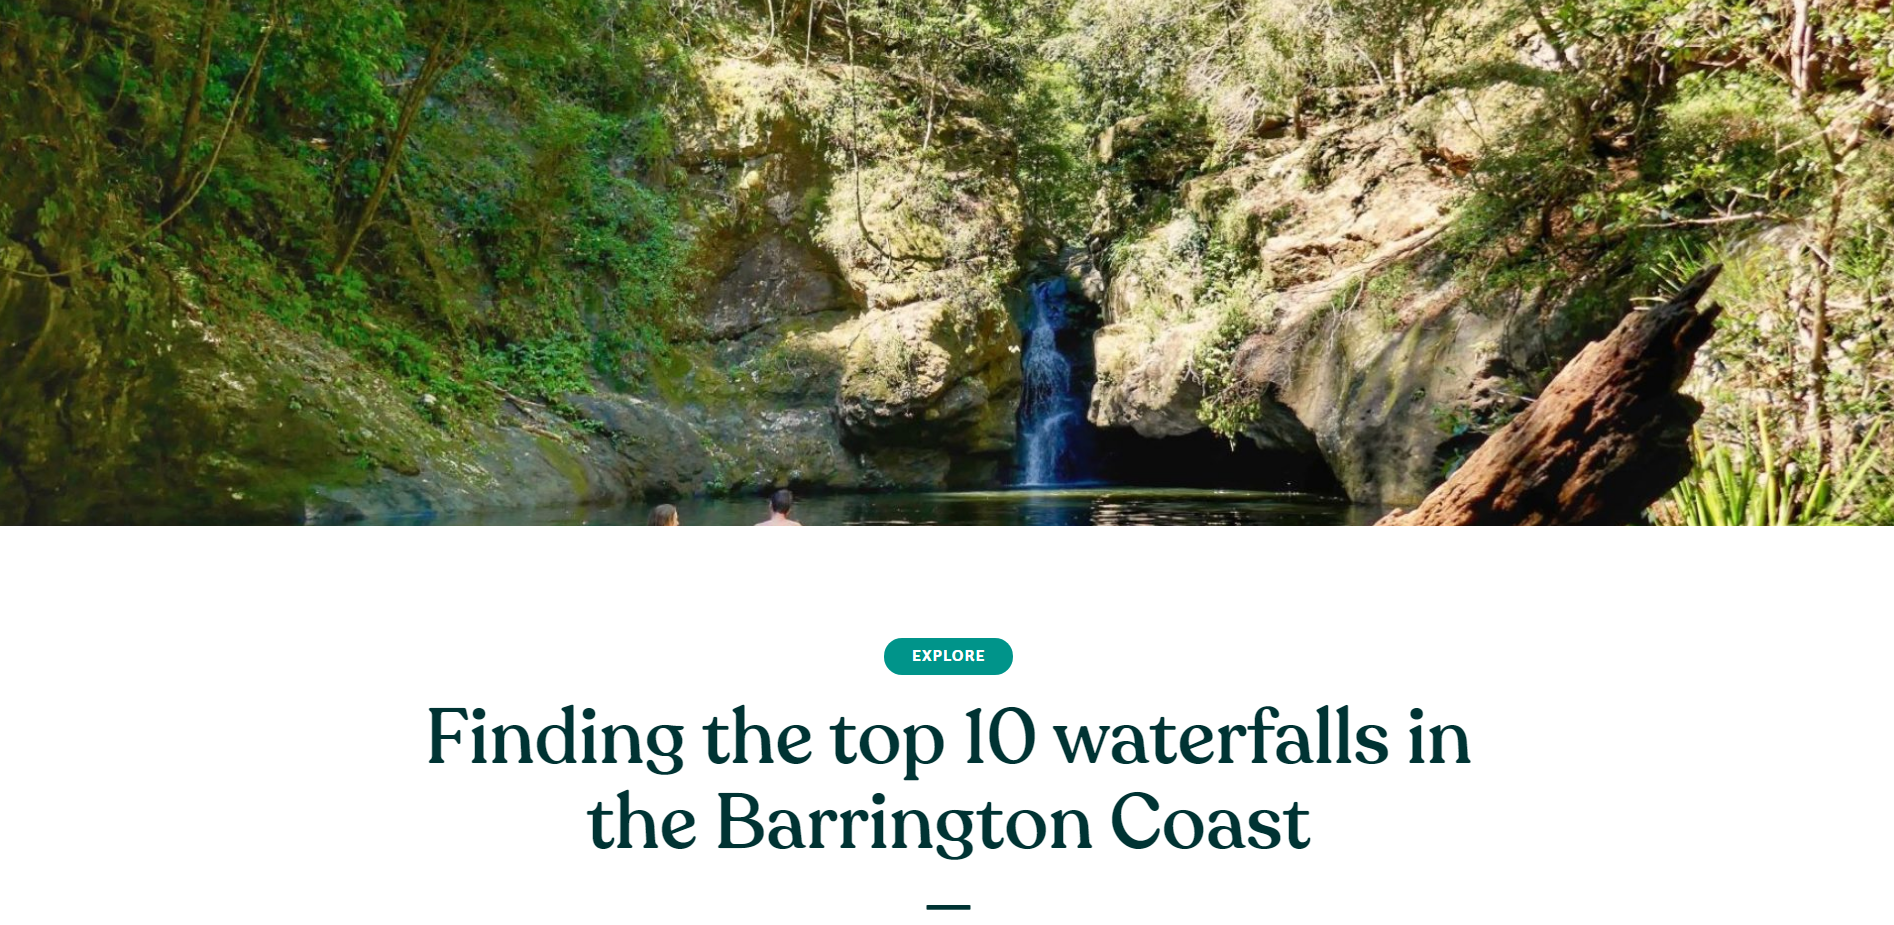 Finding the top 10 waterfalls in the Barrington Coast